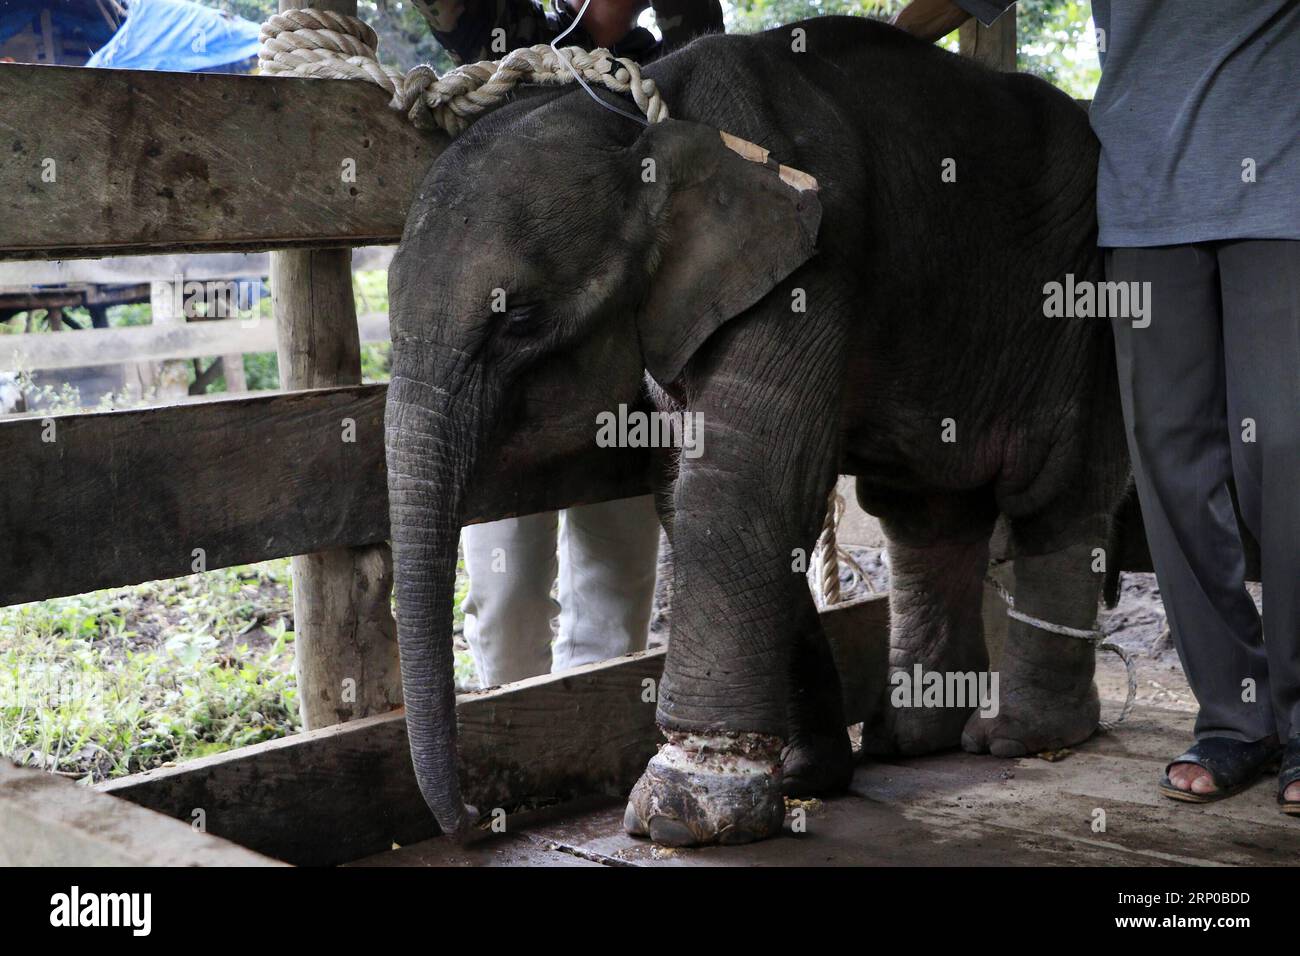 (180503) -- ACEH, May 3, 2018 -- Vets try to take care of a wounded Sumatran baby elephant in Aceh, Indonesia, May 3, 2018. ) (wtc) INDONESIA-ACEH-WOUNDED-SUMATRAN BABY ELEPHANT Junaidi PUBLICATIONxNOTxINxCHN Stock Photo